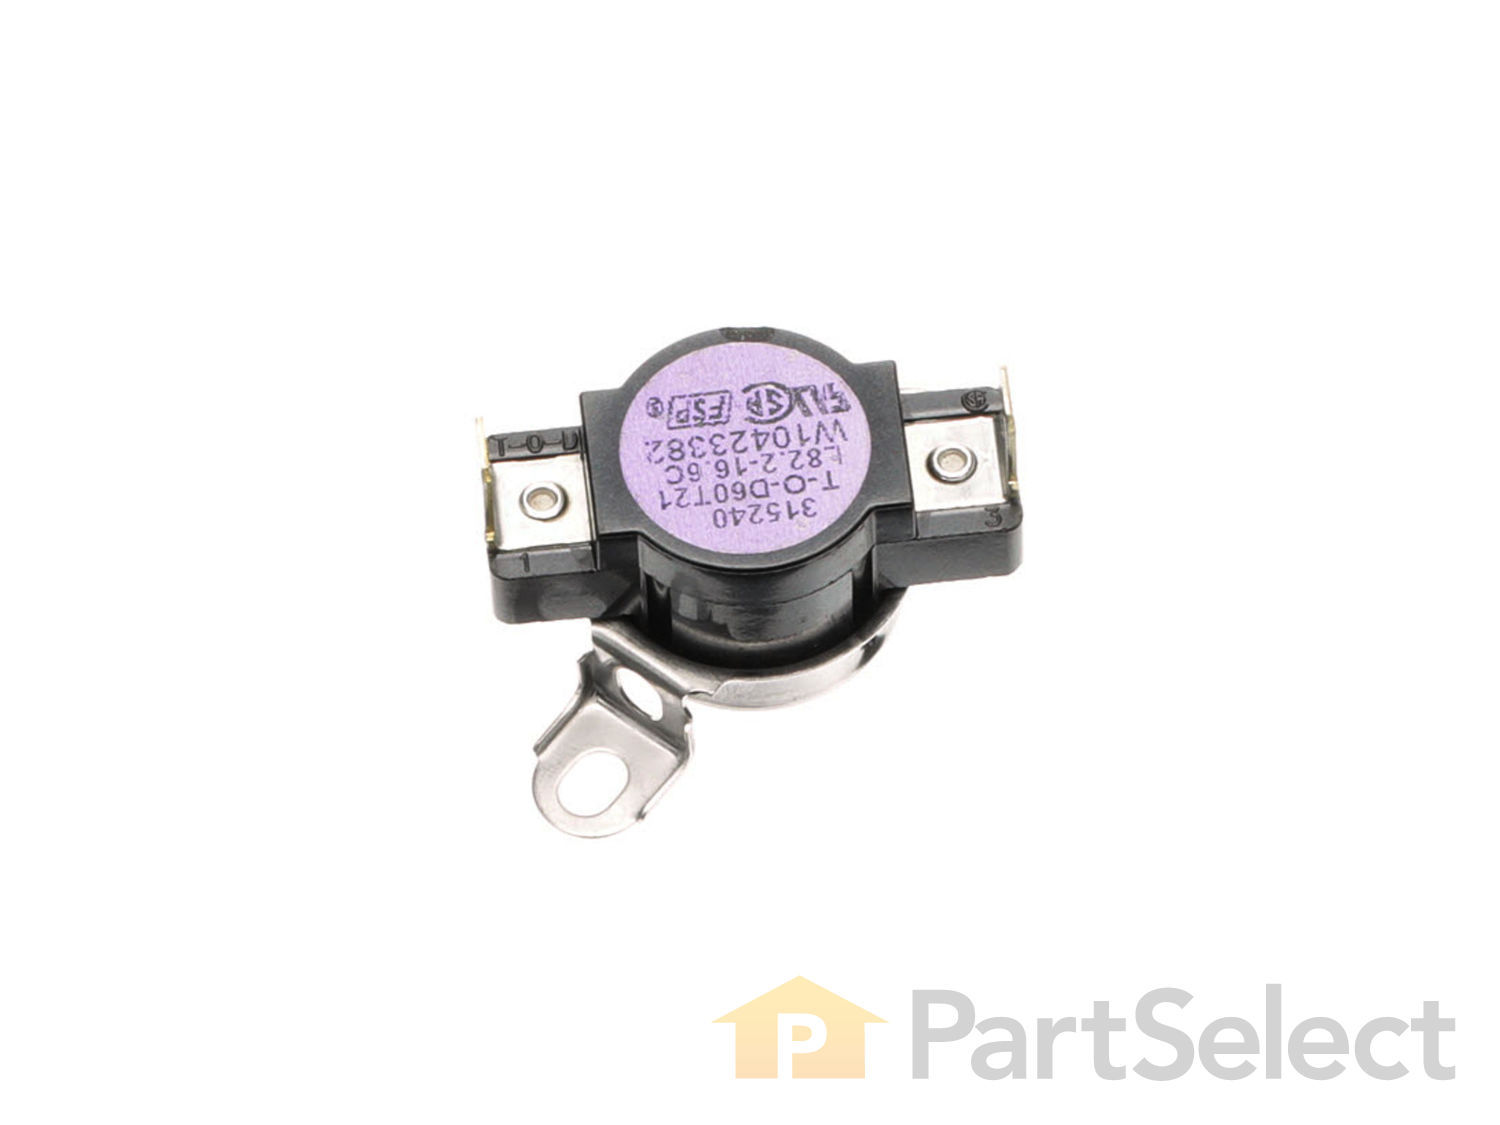 Whirlpool W11050897 High Limit Thermostat 